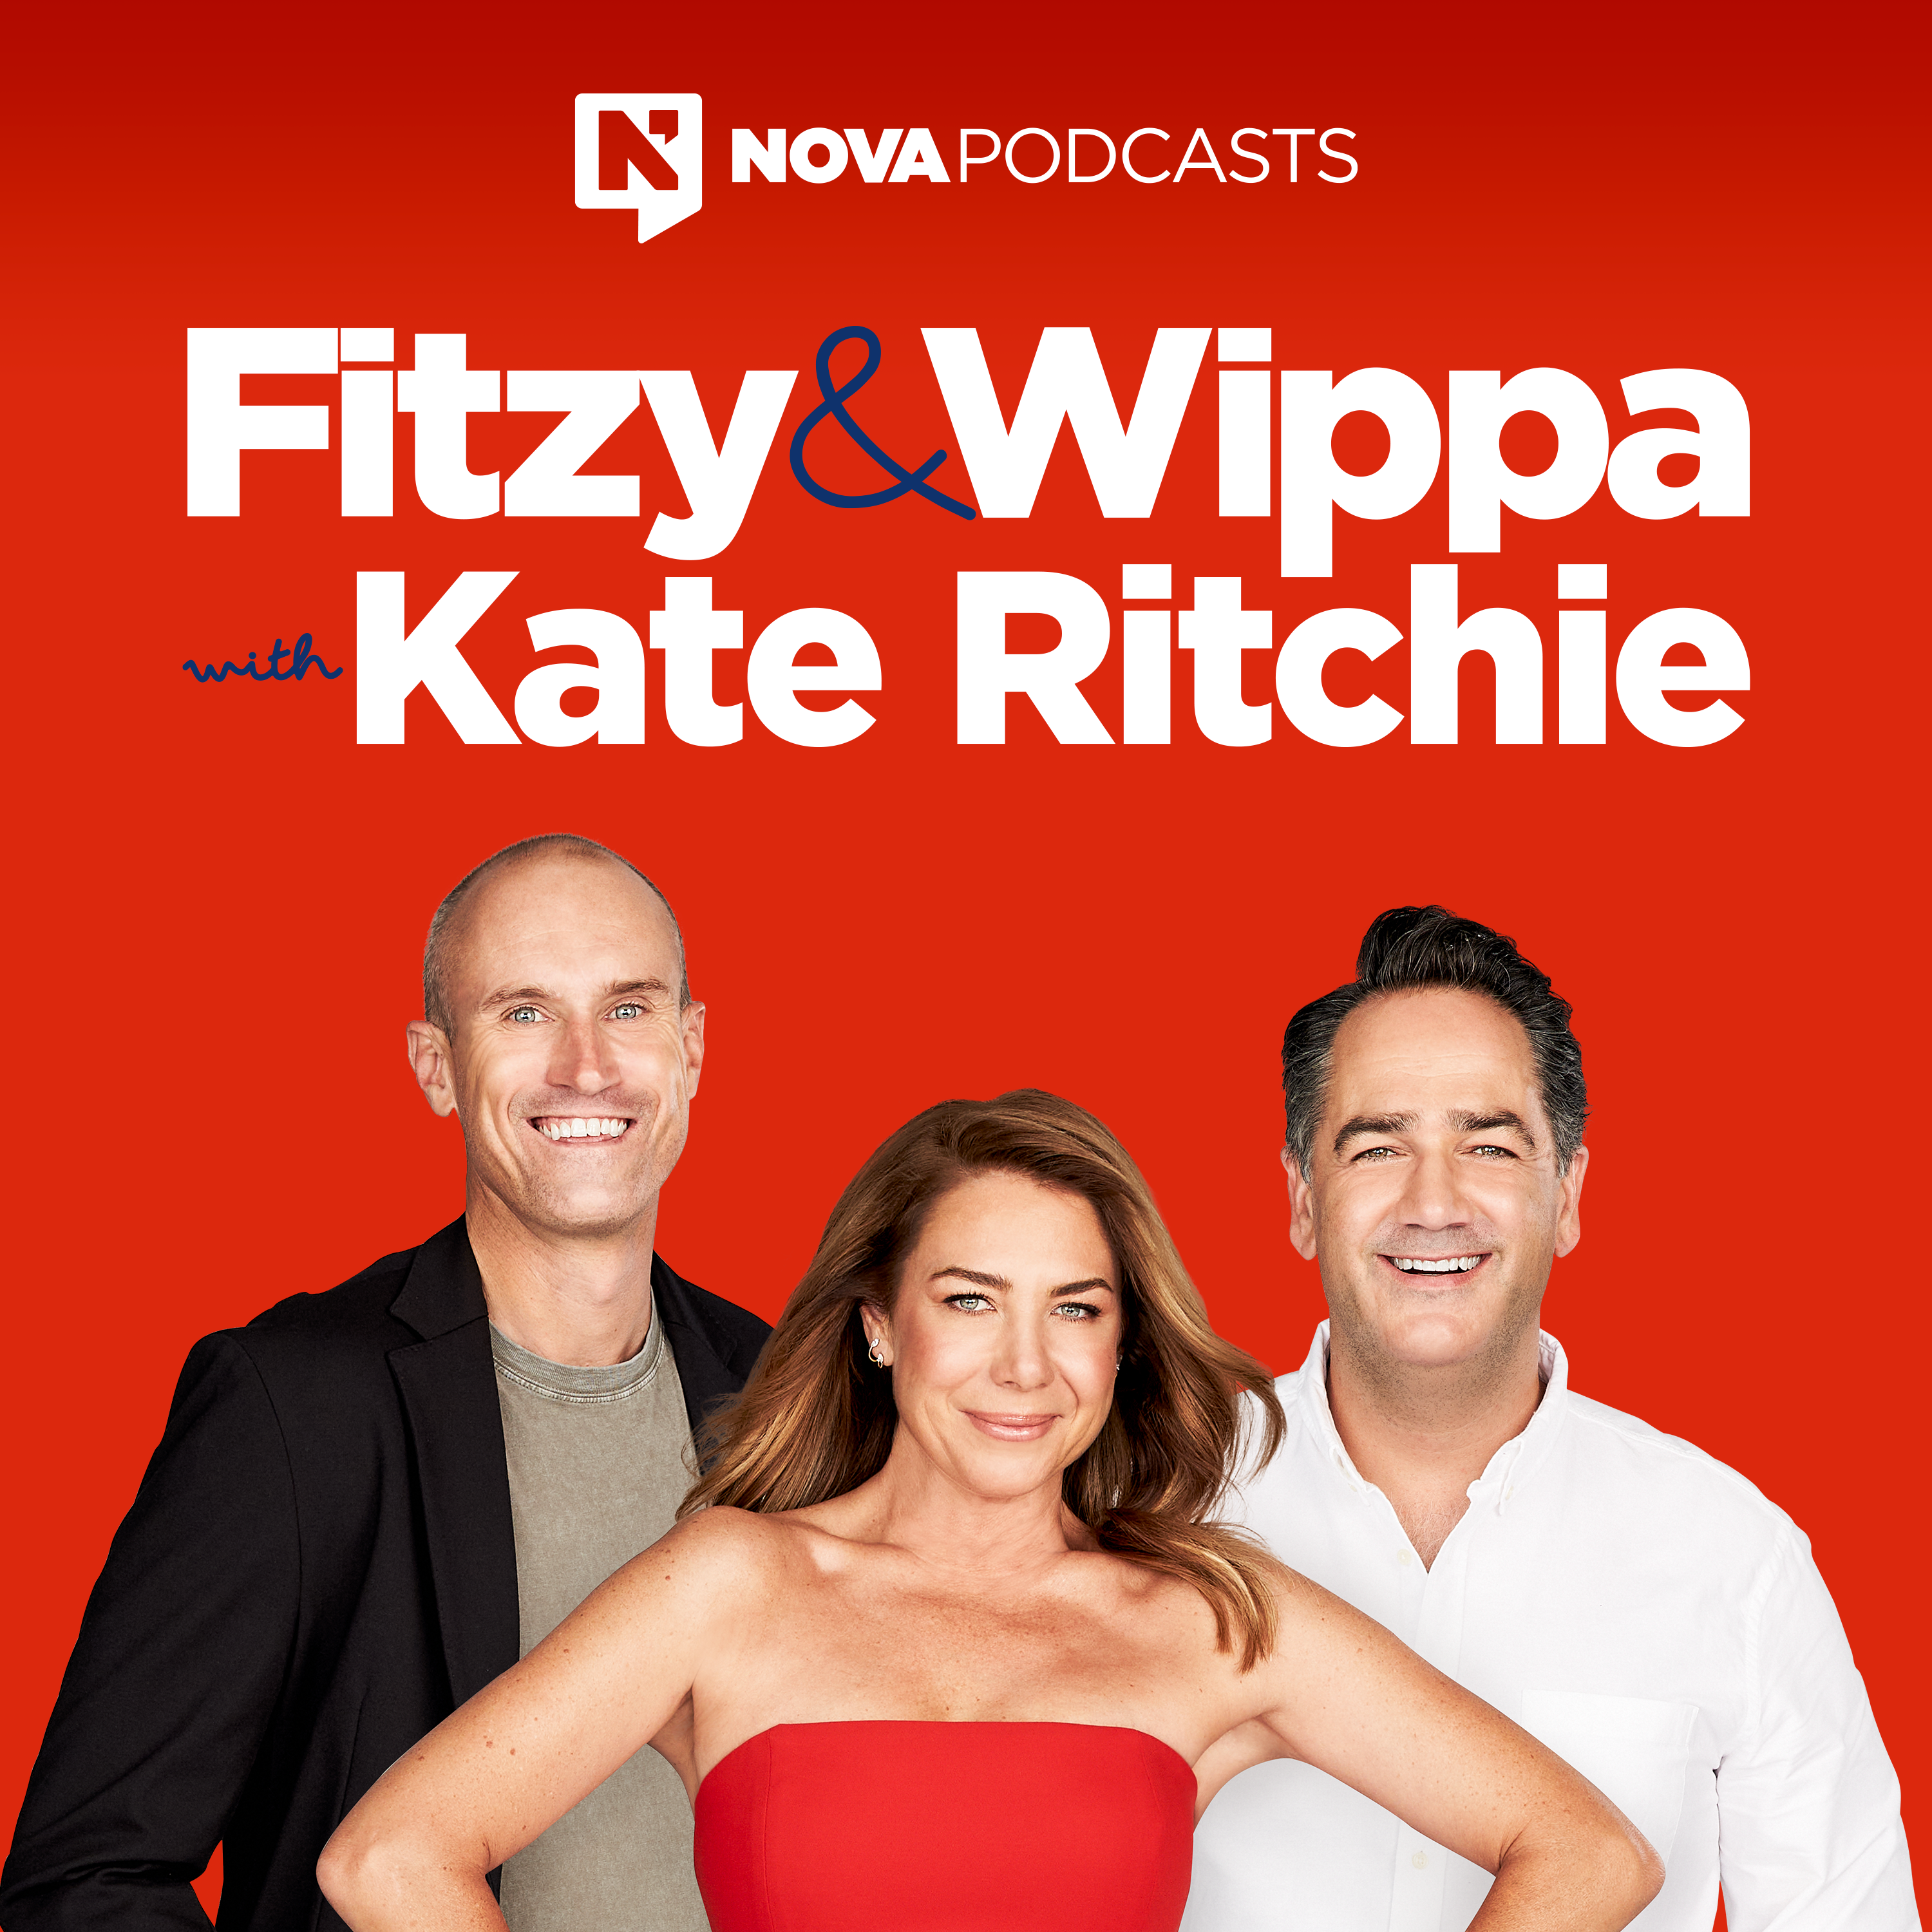 EXTRA - Wippa's 'best' allergic reaction story